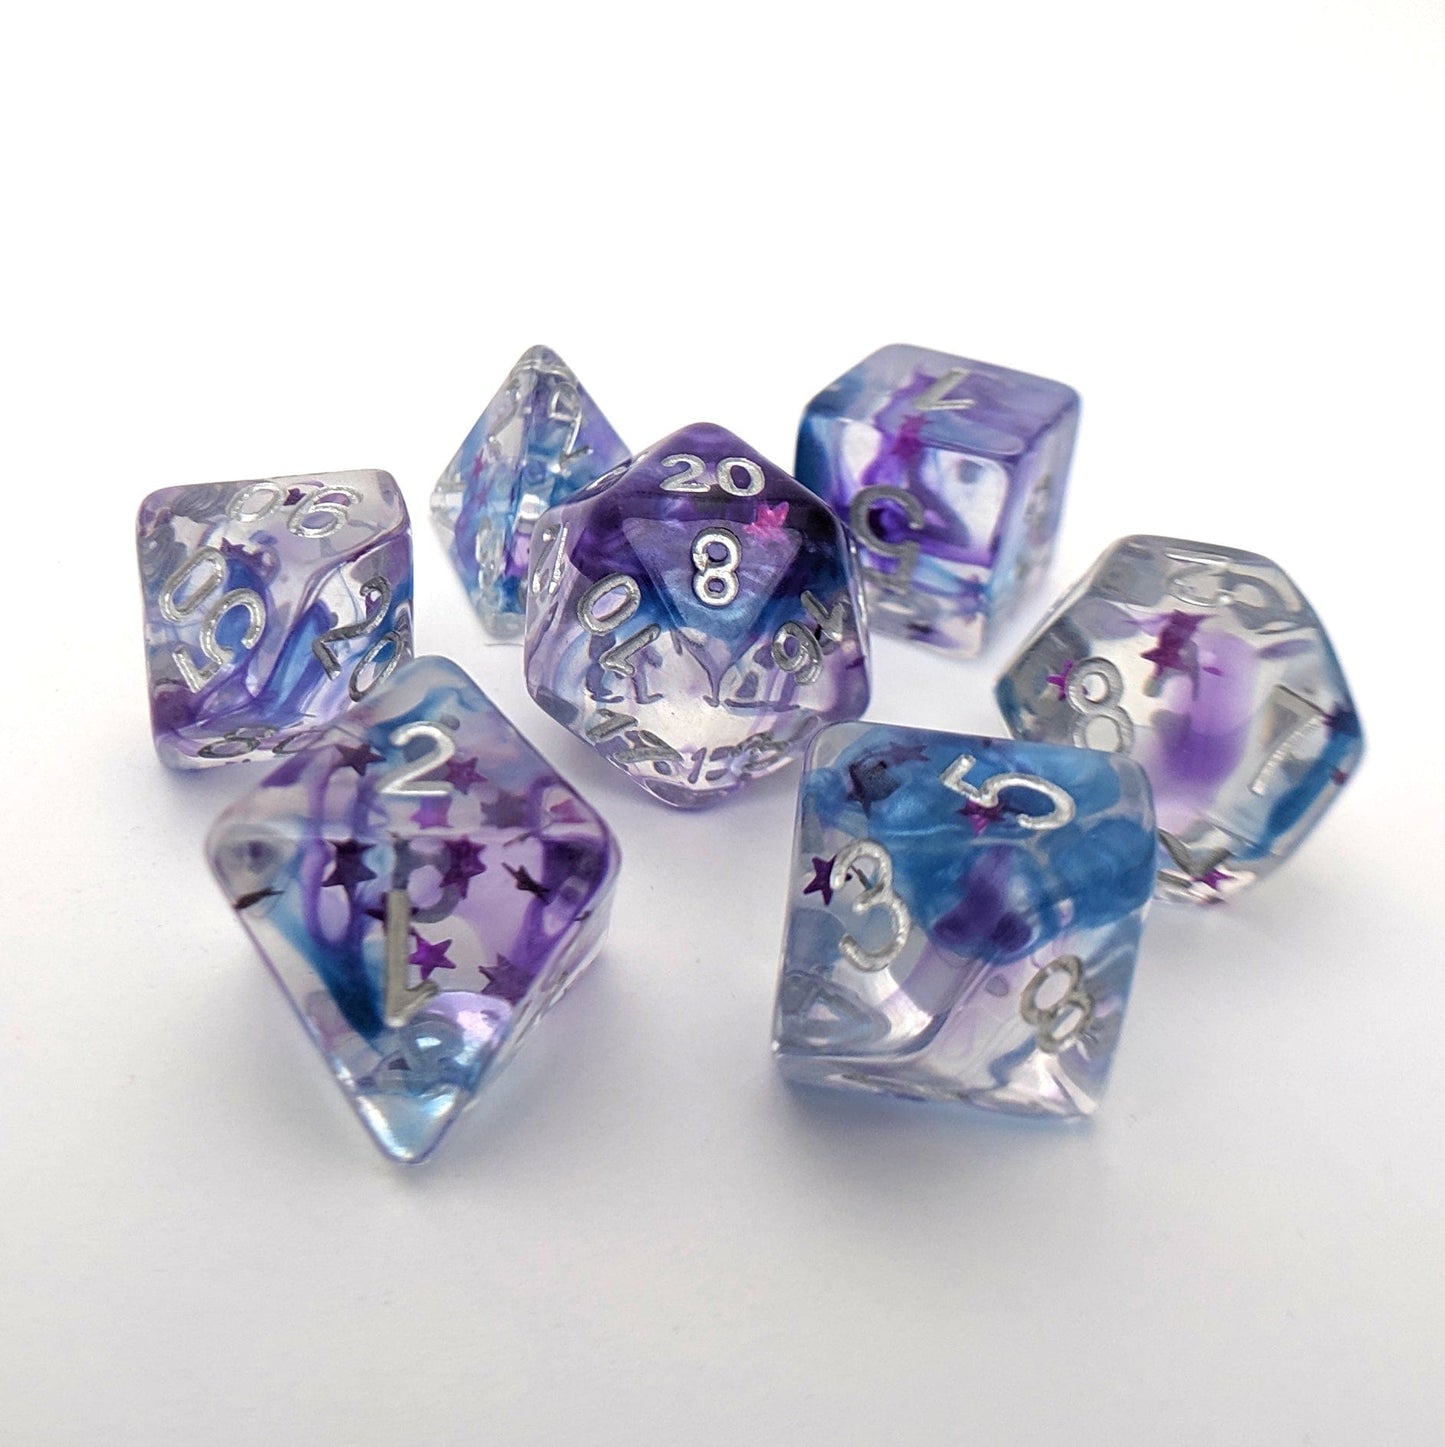 Shadow Moon Dice Set, Translucent Resin Dice with Pearly Violet and Indigo ink and Magenta Stars - CozyGamer